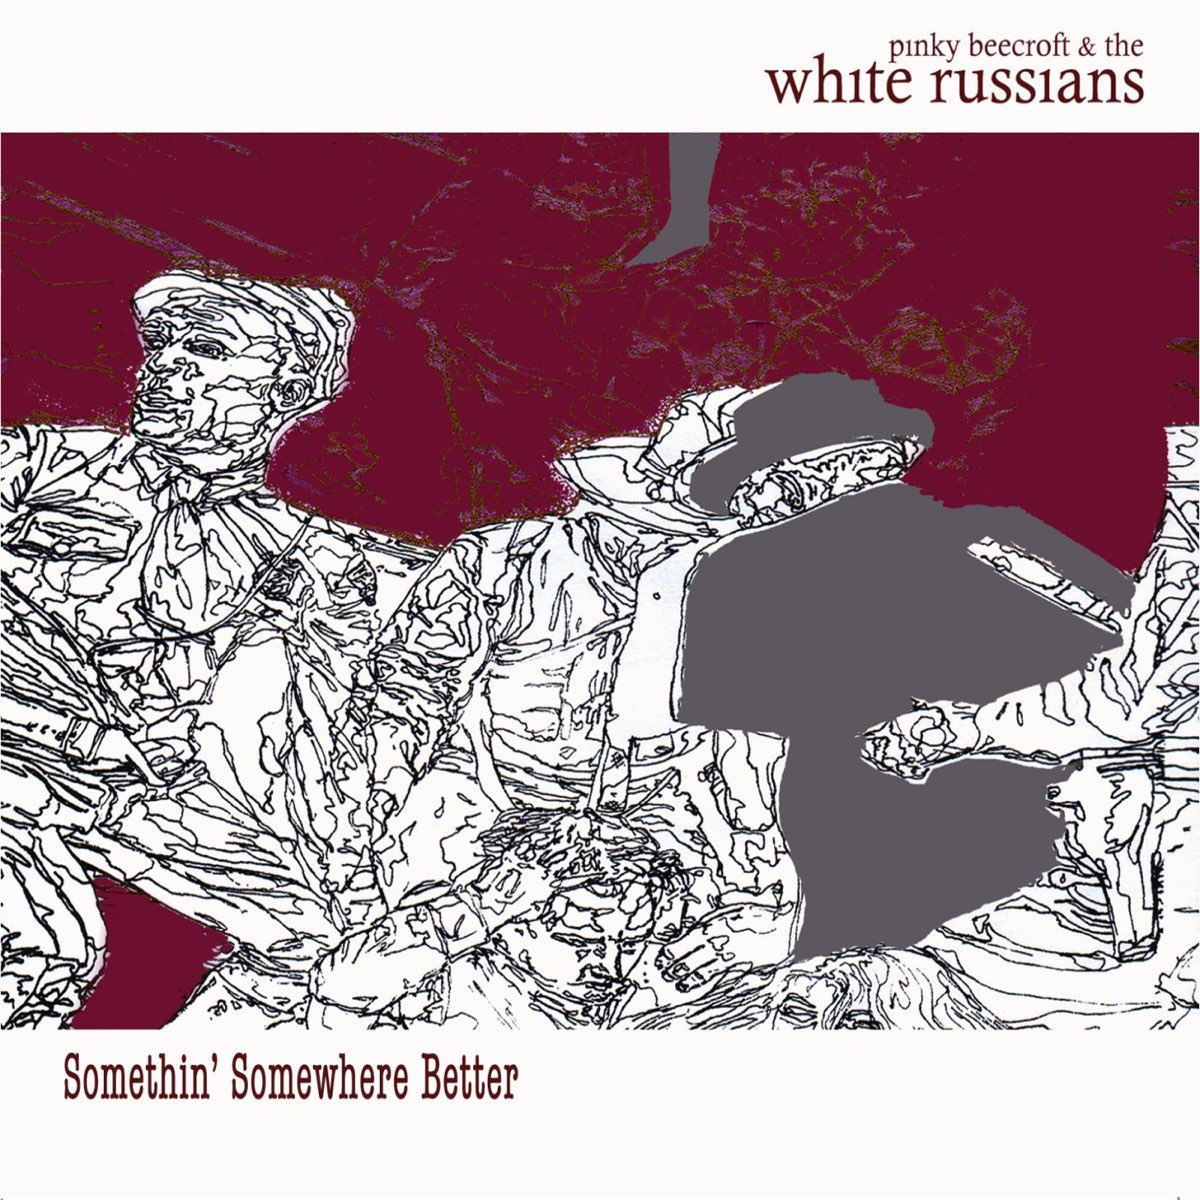 Белый русский песня. White Russian игра. White Russian ultranationalist. Russians are White Europeans. Someplace better.